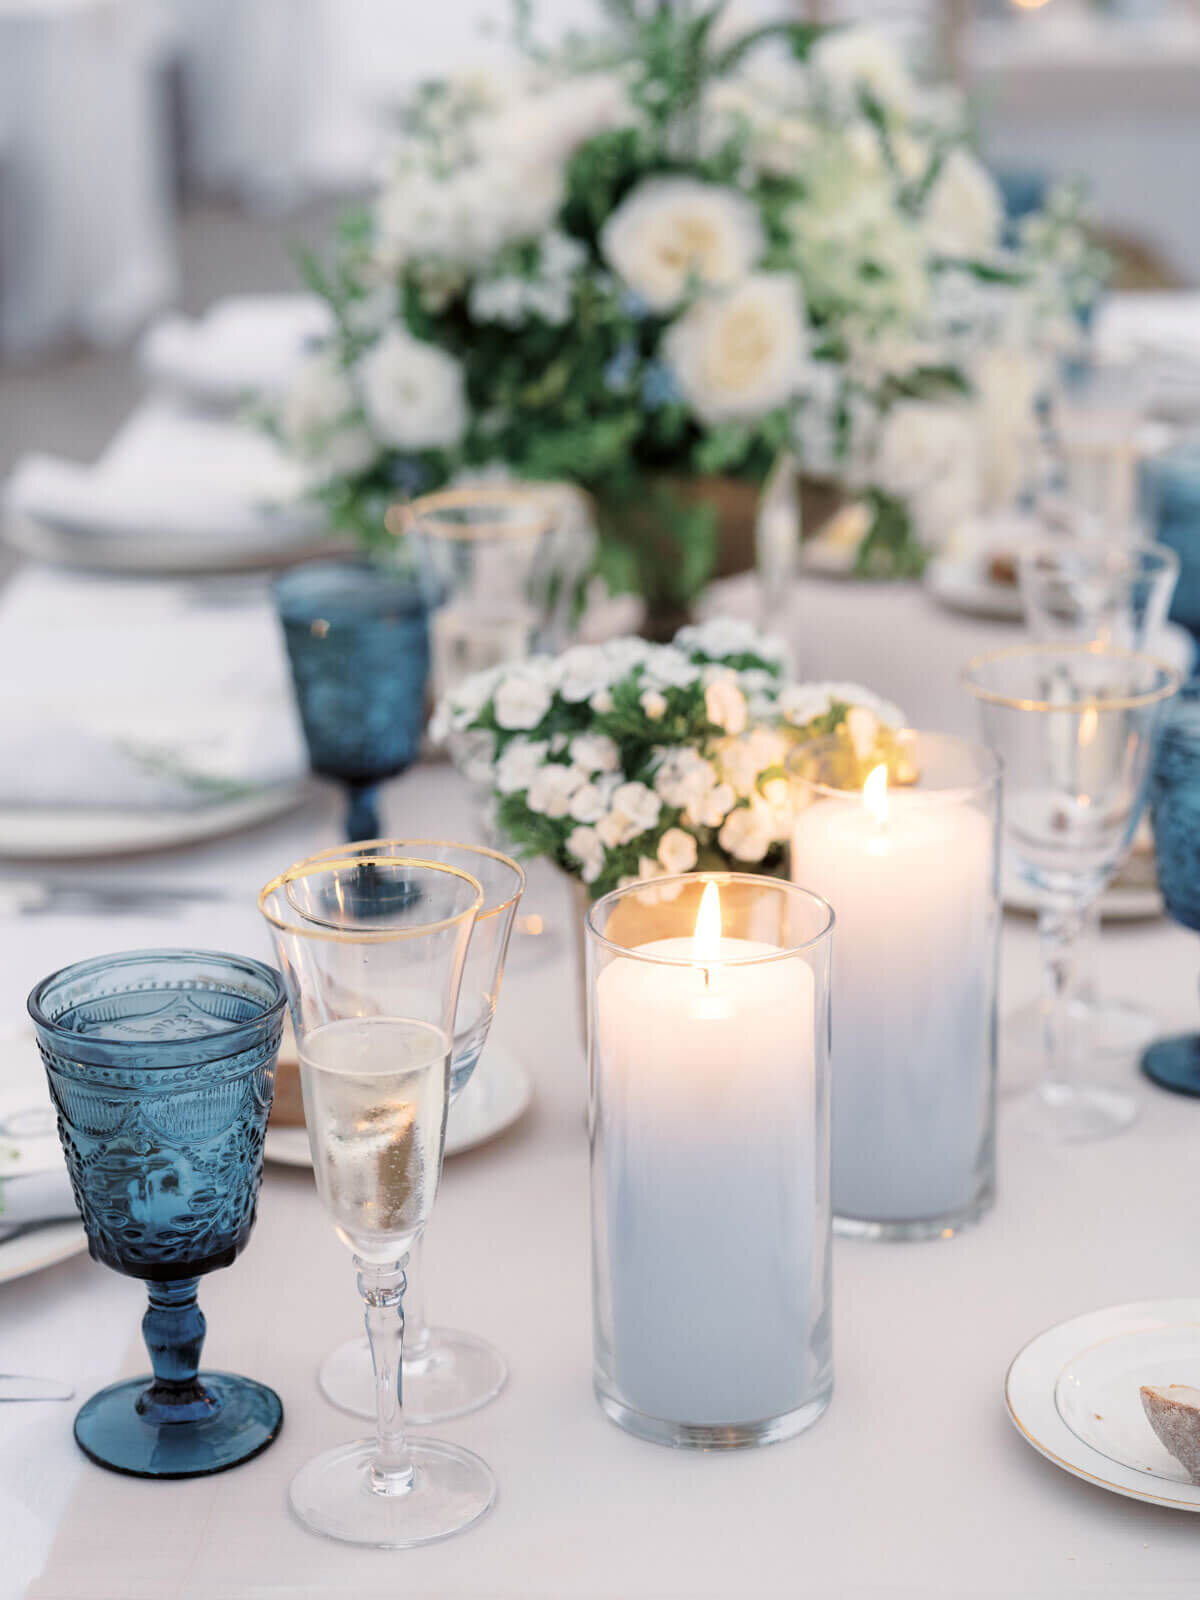 Big white candles at an elegant wedding dining table with flowers, cutleries, and blue wine glasses. Image by Jenny Fu Studio